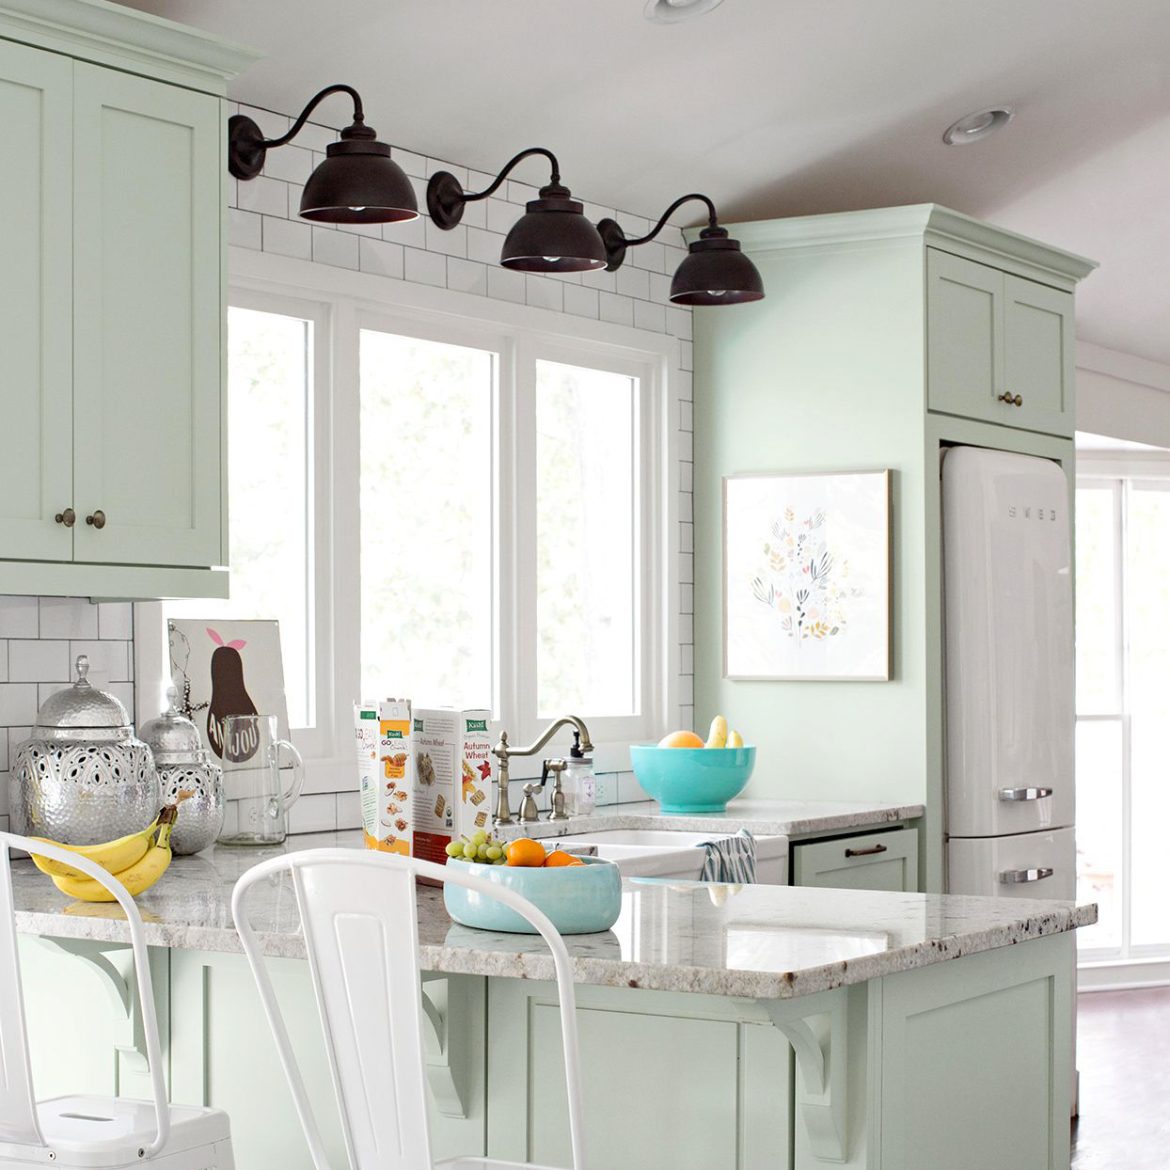 Bringing Light to Life: Inspirational Kitchen Lighting Ideas from Houzz